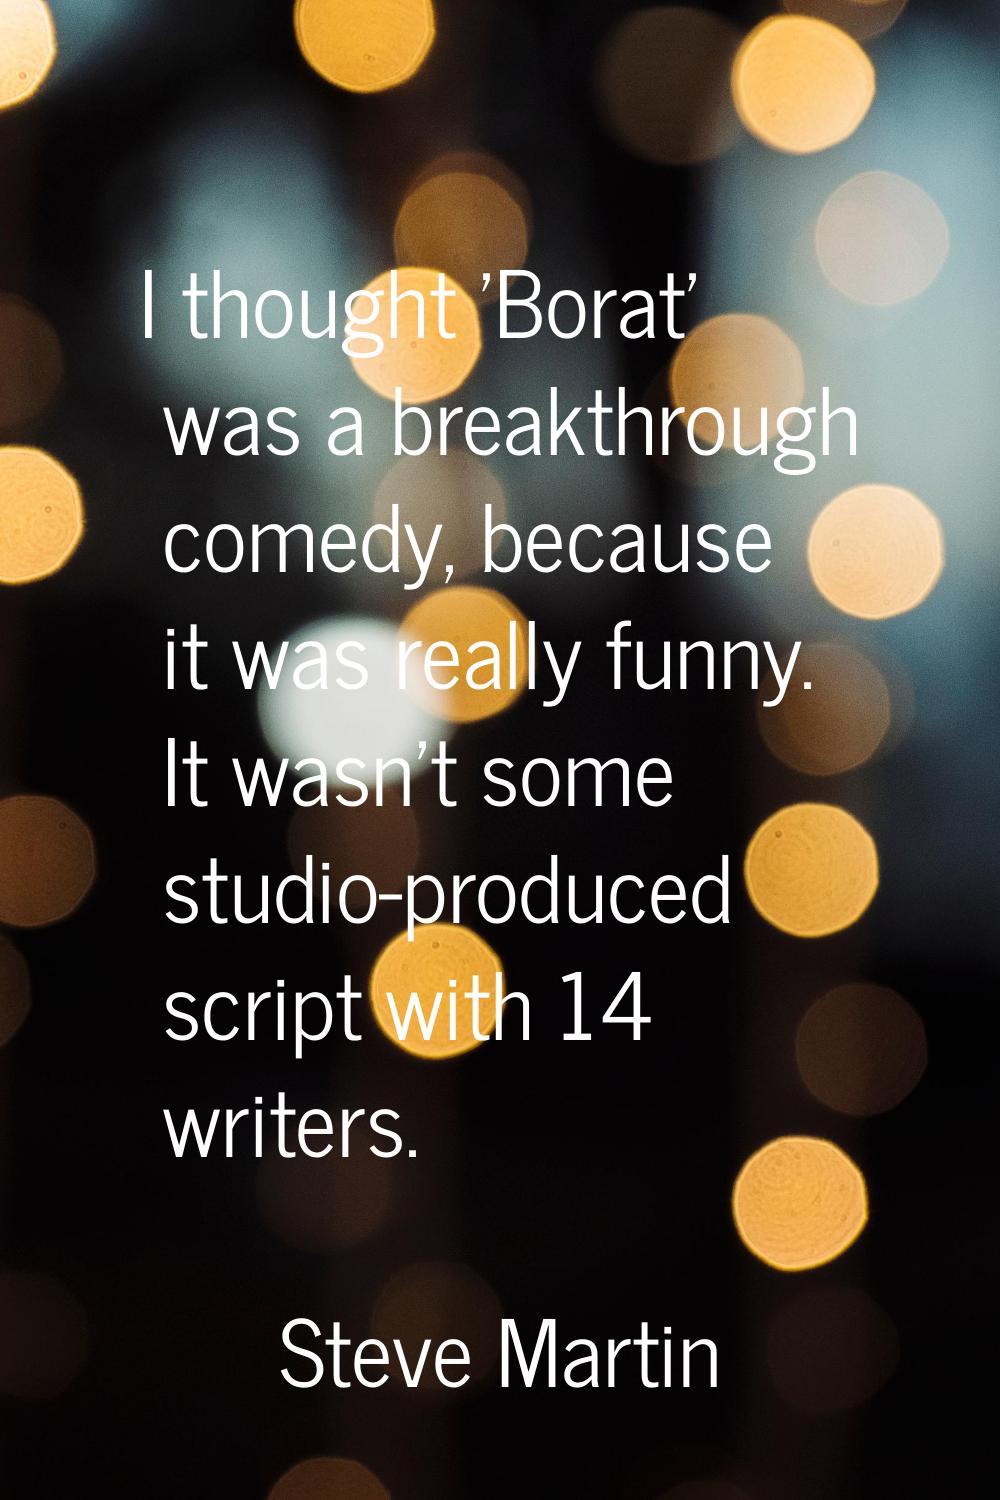 I thought 'Borat' was a breakthrough comedy, because it was really funny. It wasn't some studio-pro